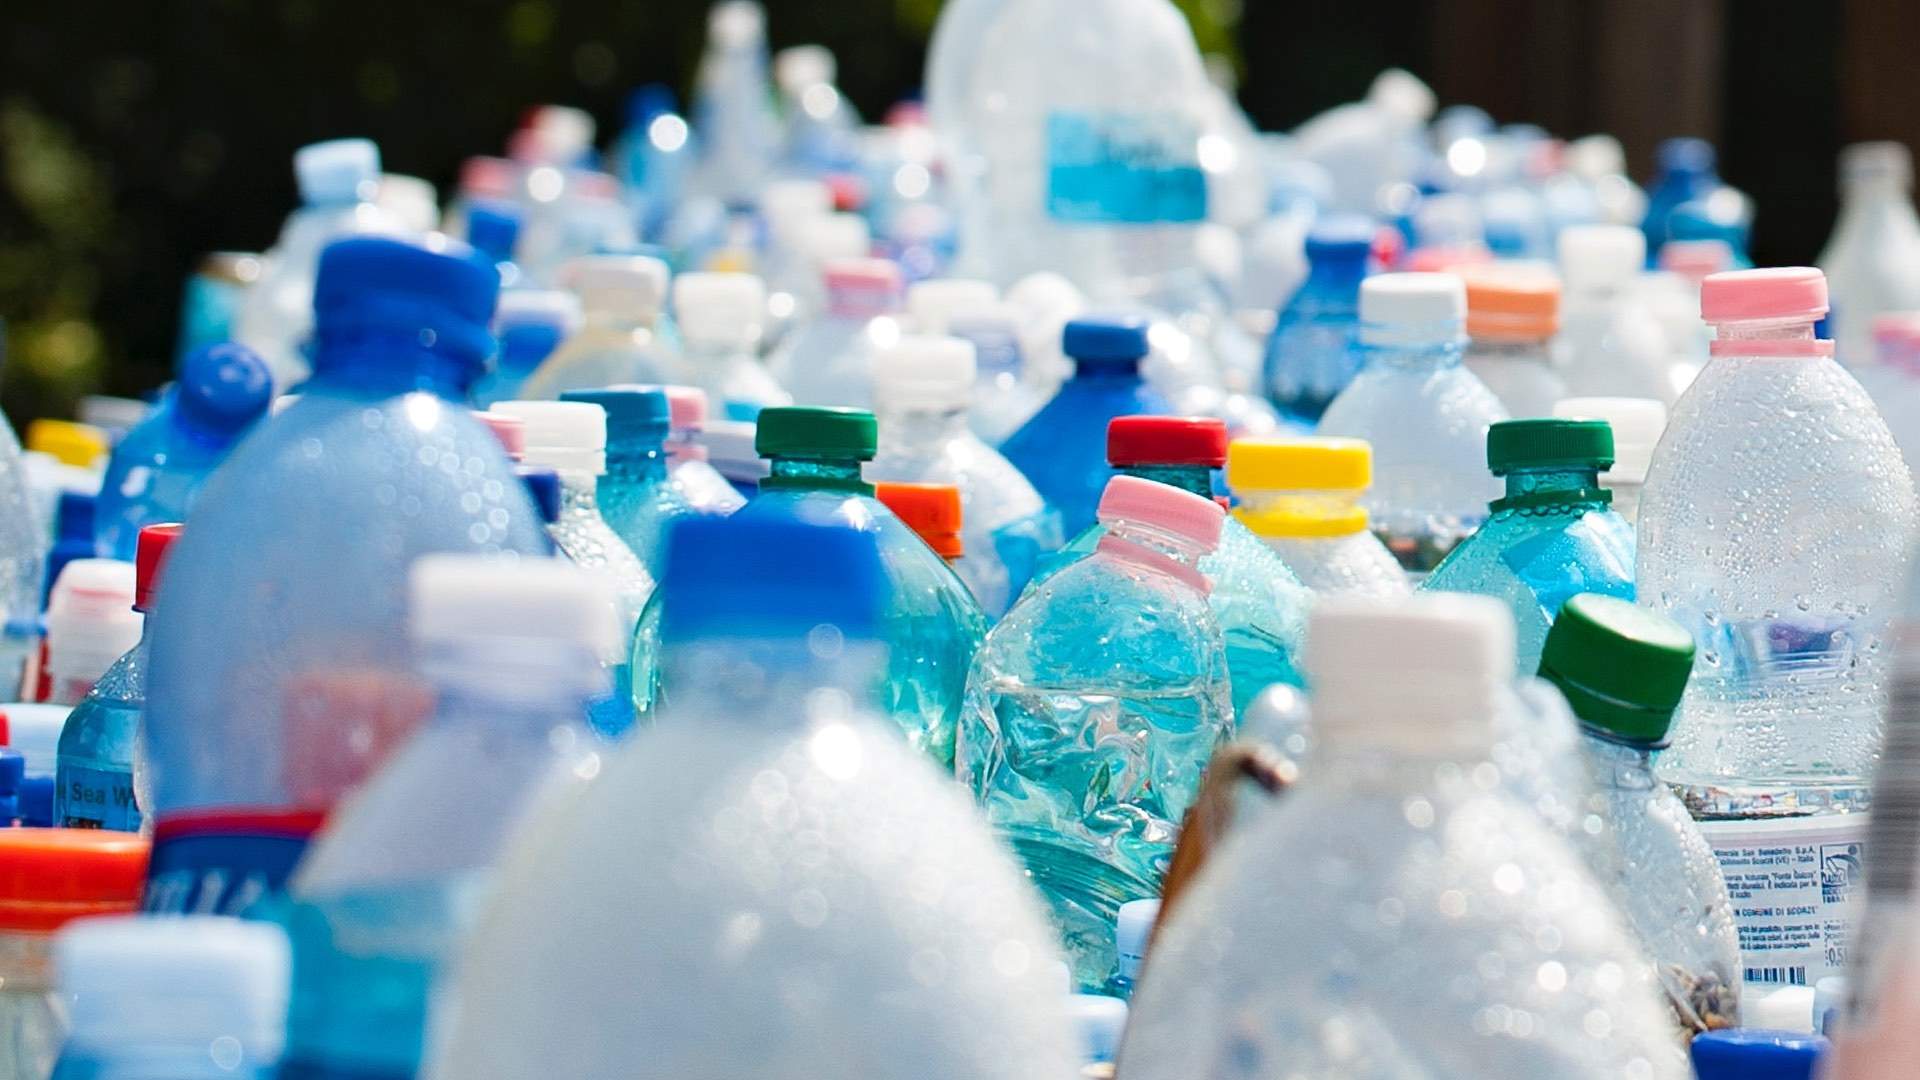 You Can Now Exchange Empty Bottles for Cash Thanks to Queensland's New Container Refund Scheme